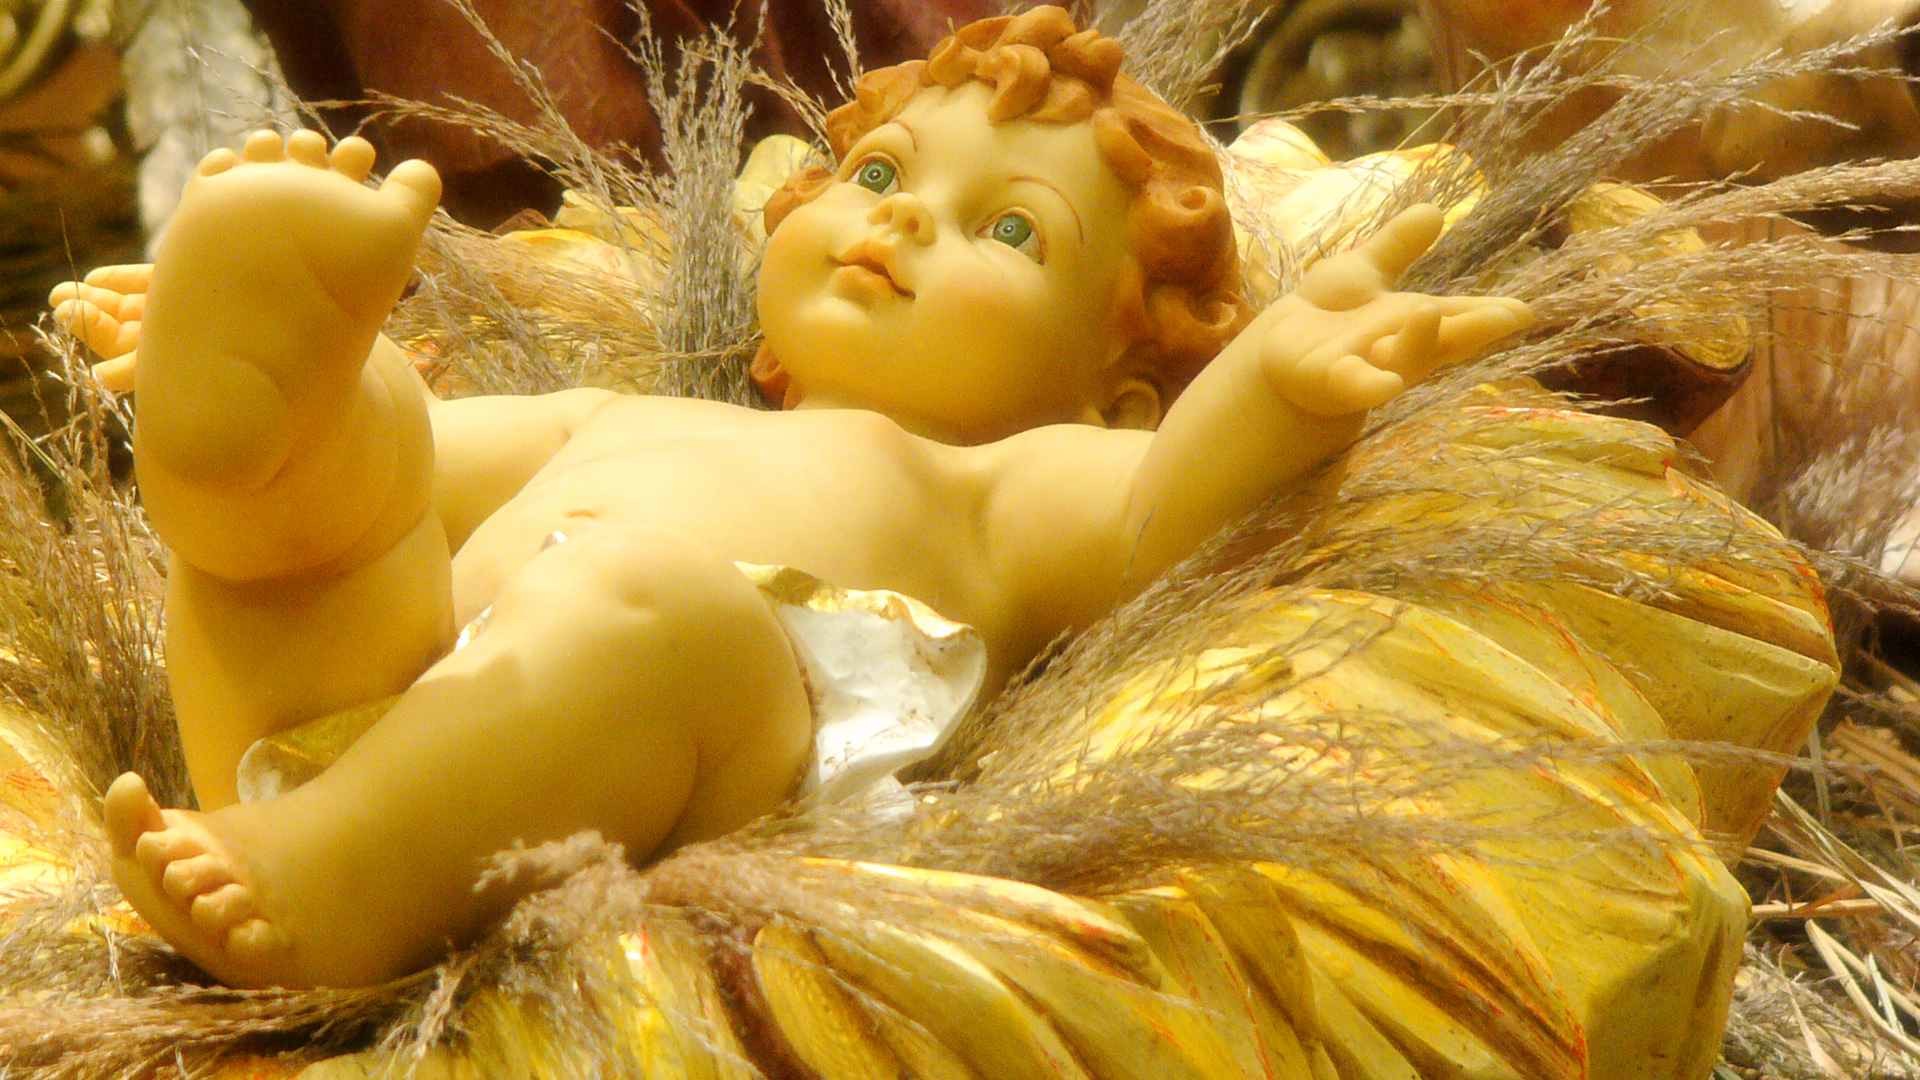 1920x1080 Photo Of Baby Jesus - HD Wallpapers and Pictures